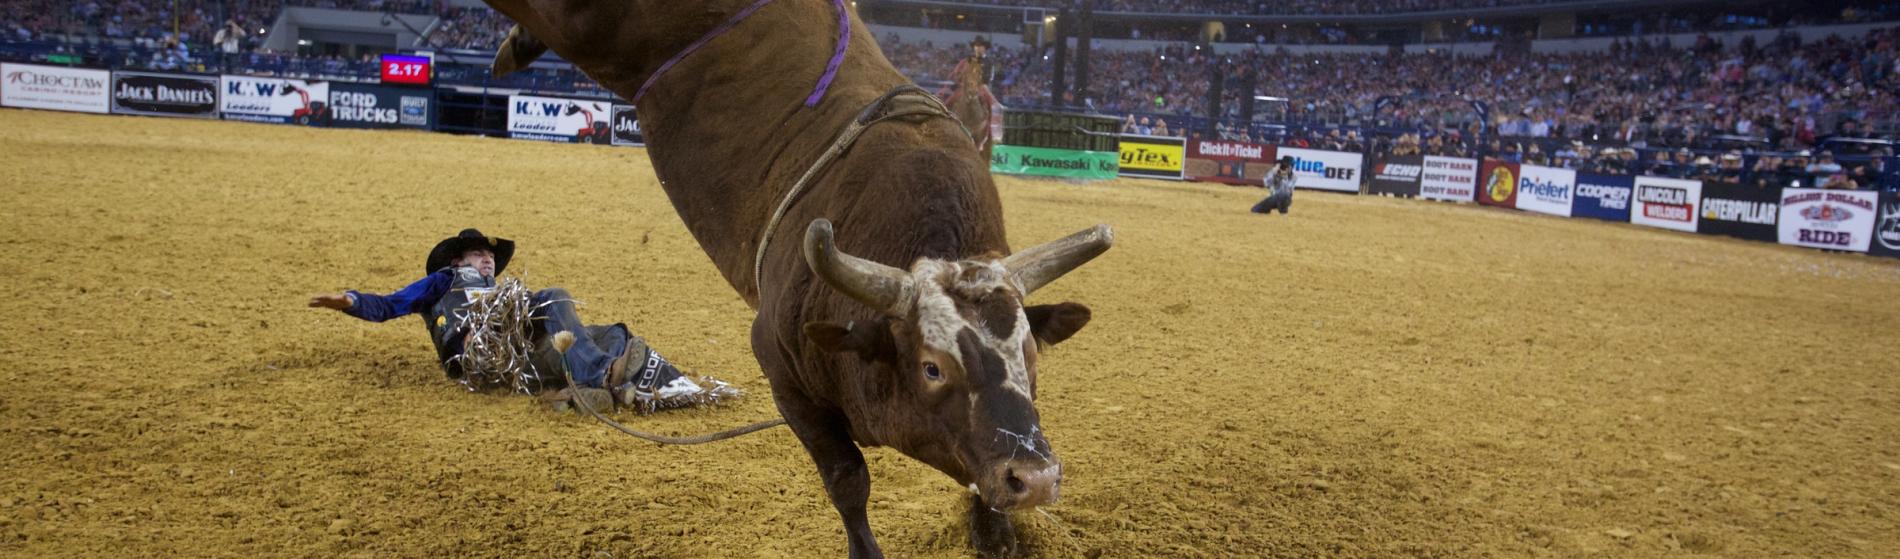 10 Things You Didn't Know About the Bulls of PBR